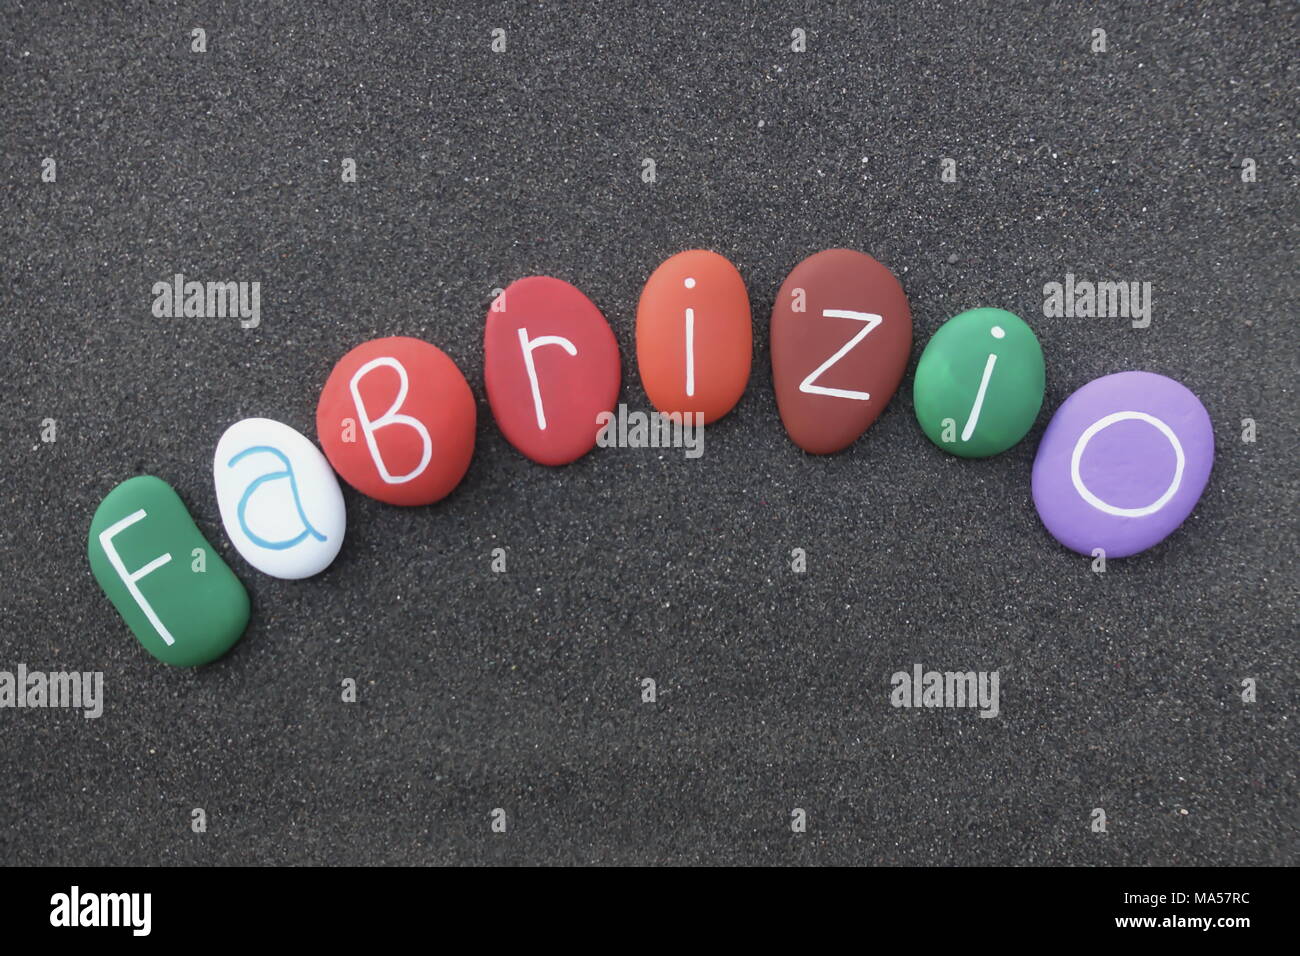 Fabrizio, masculine given name with multicolored stones over black volcanic sand Stock Photo